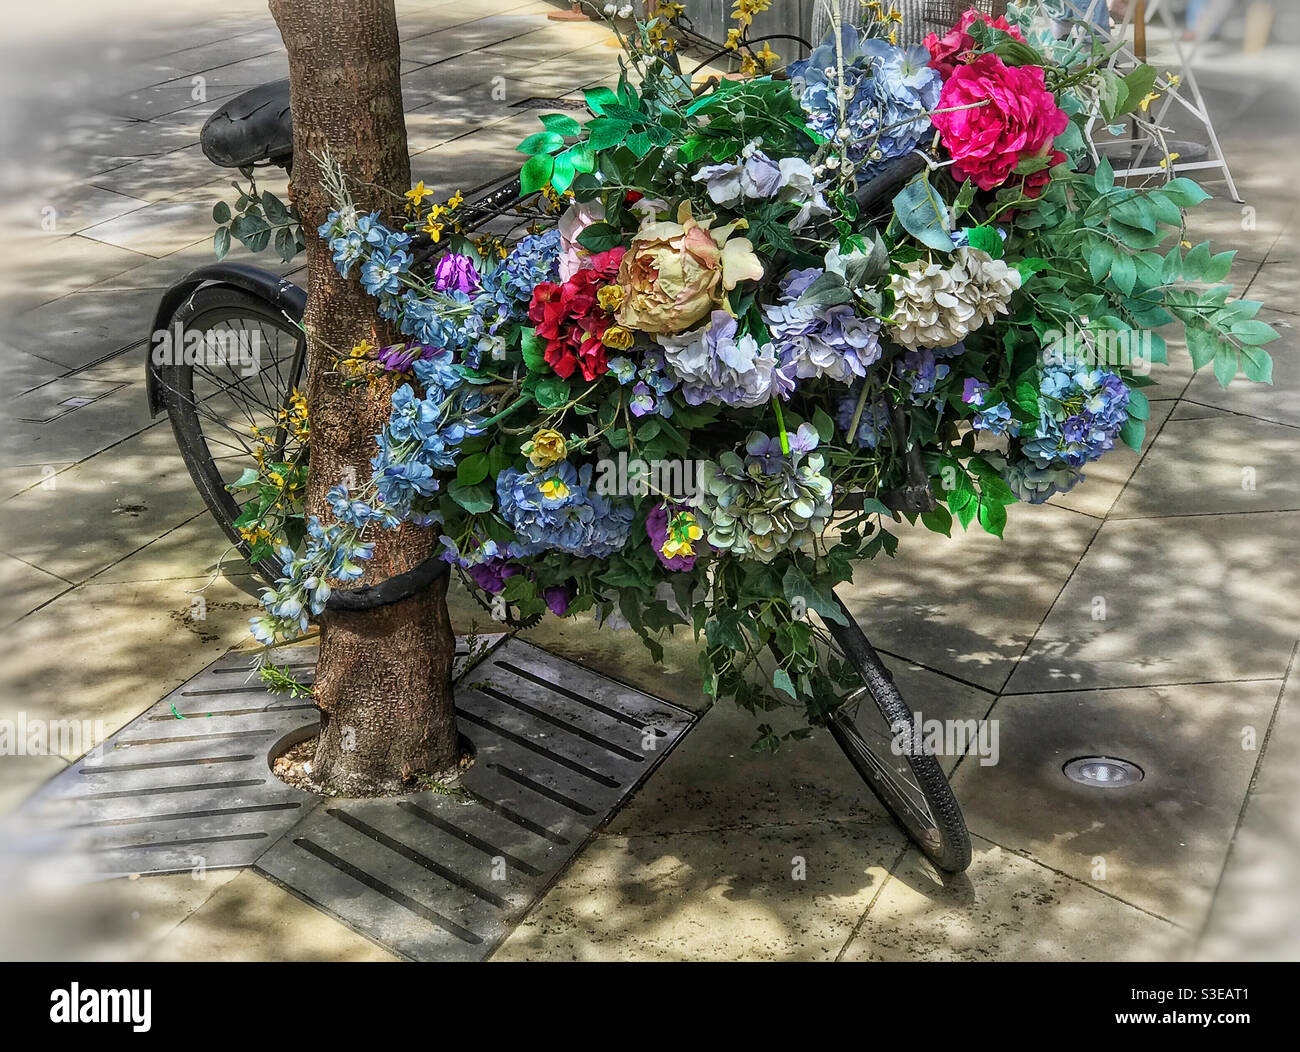 Bicycle covered in large flower arrangement. Stock Photo